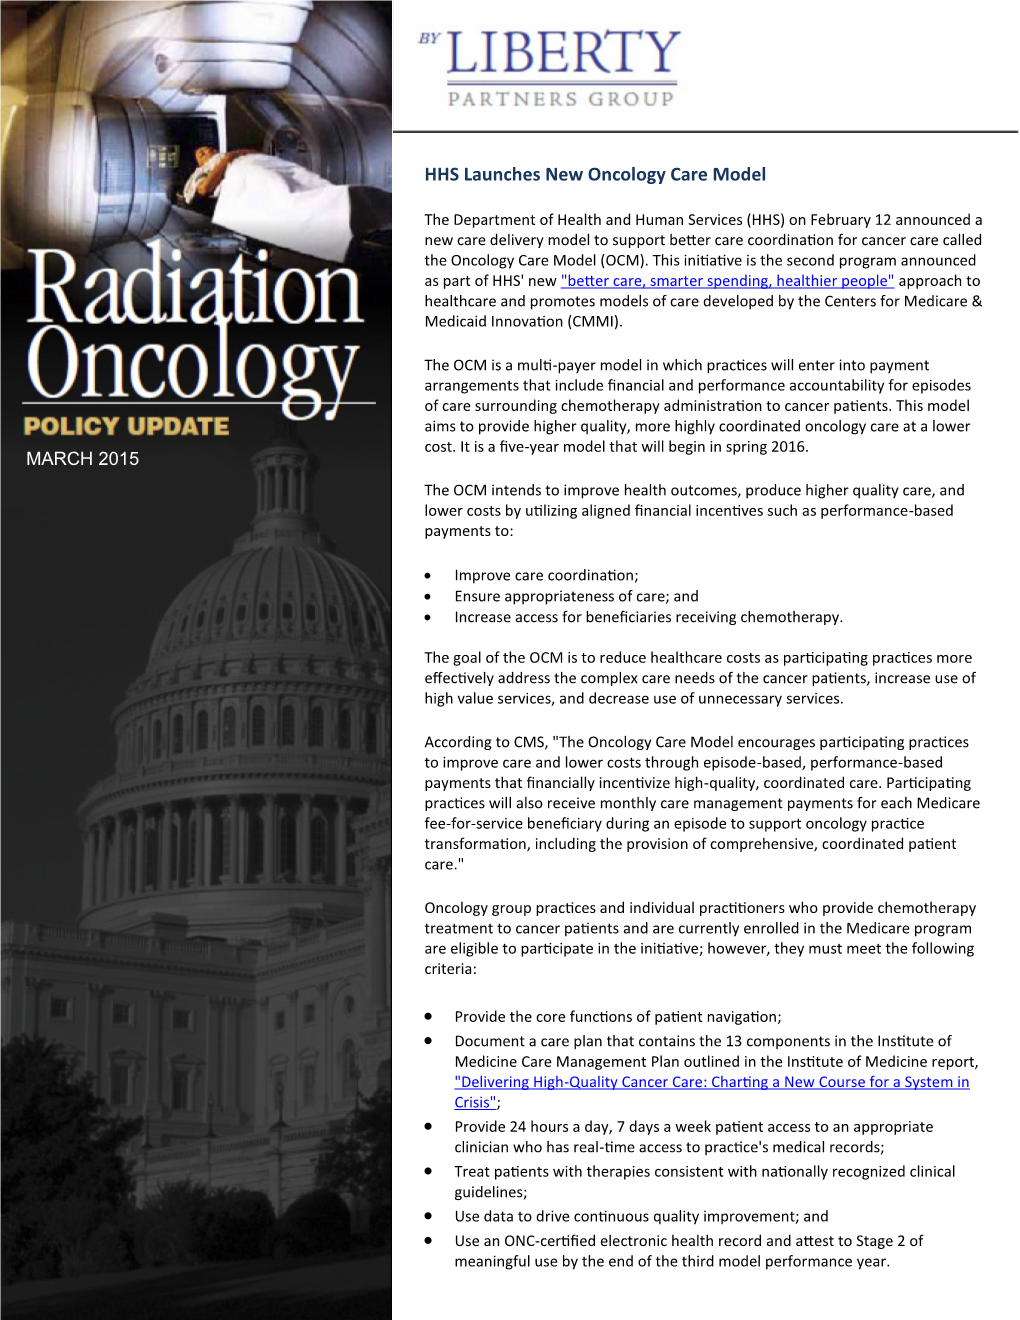 HHS Launches New Oncology Care Model